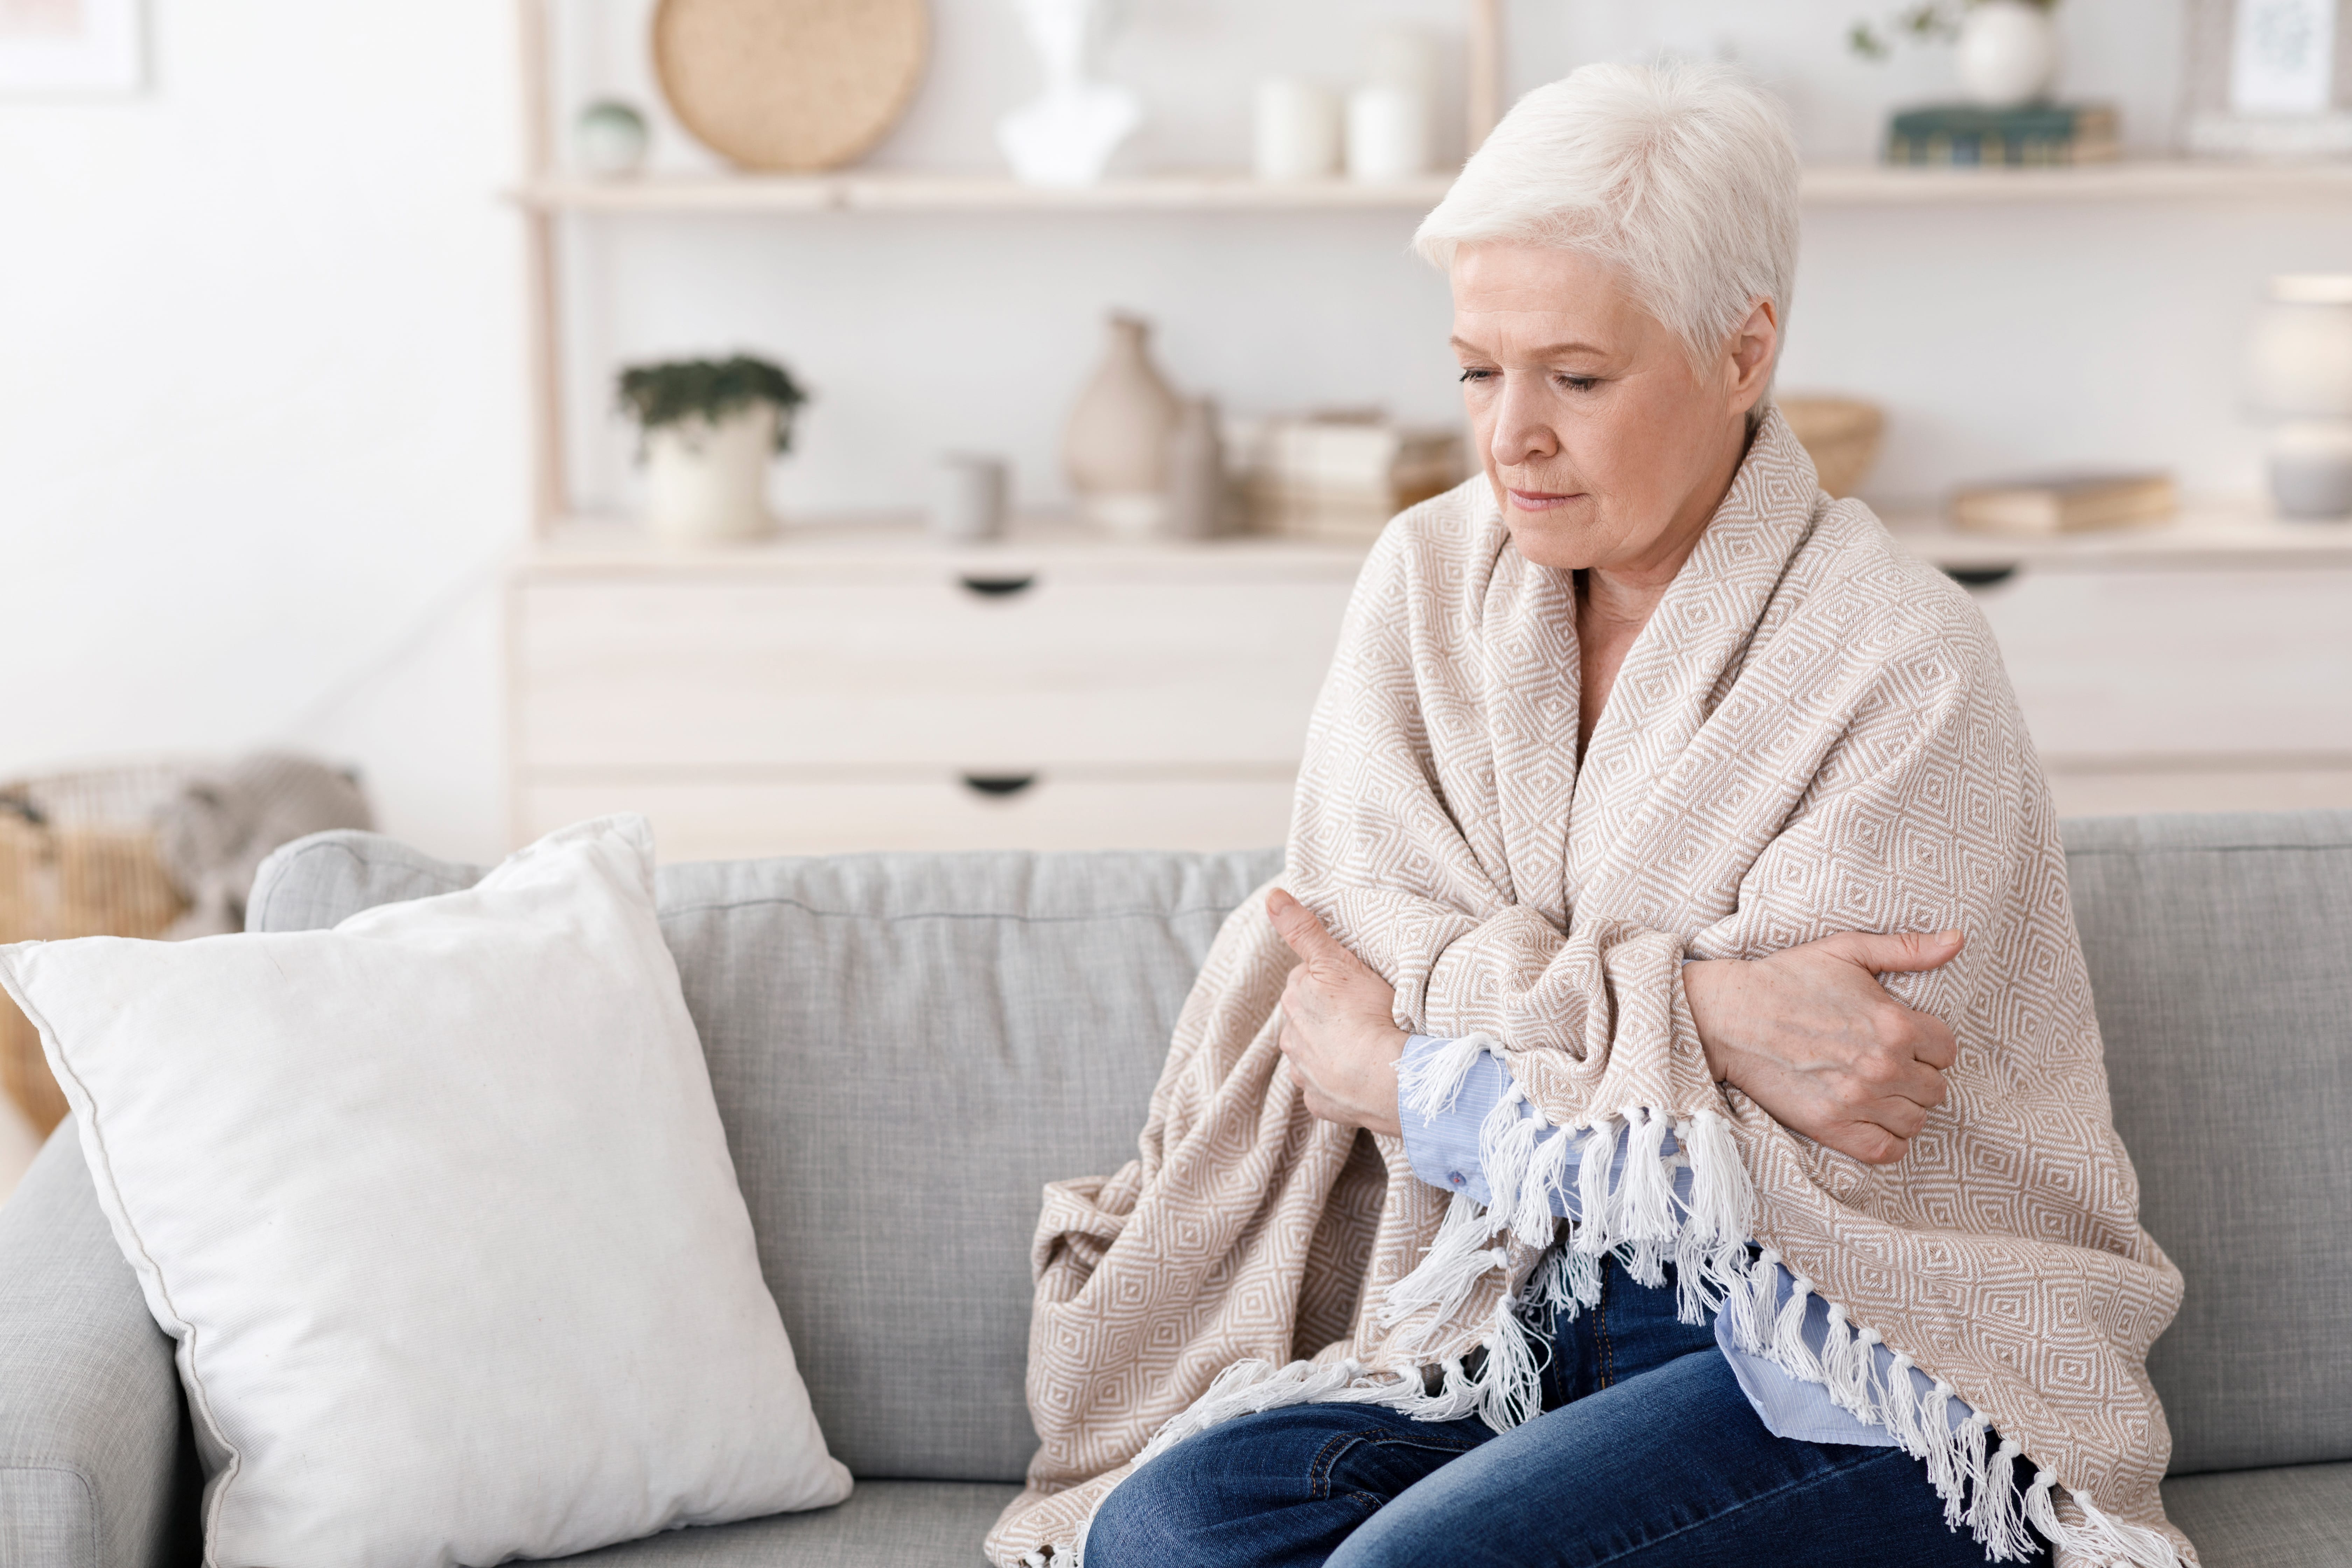 An older adult wrapping herself in a shawl to stay warm in the home